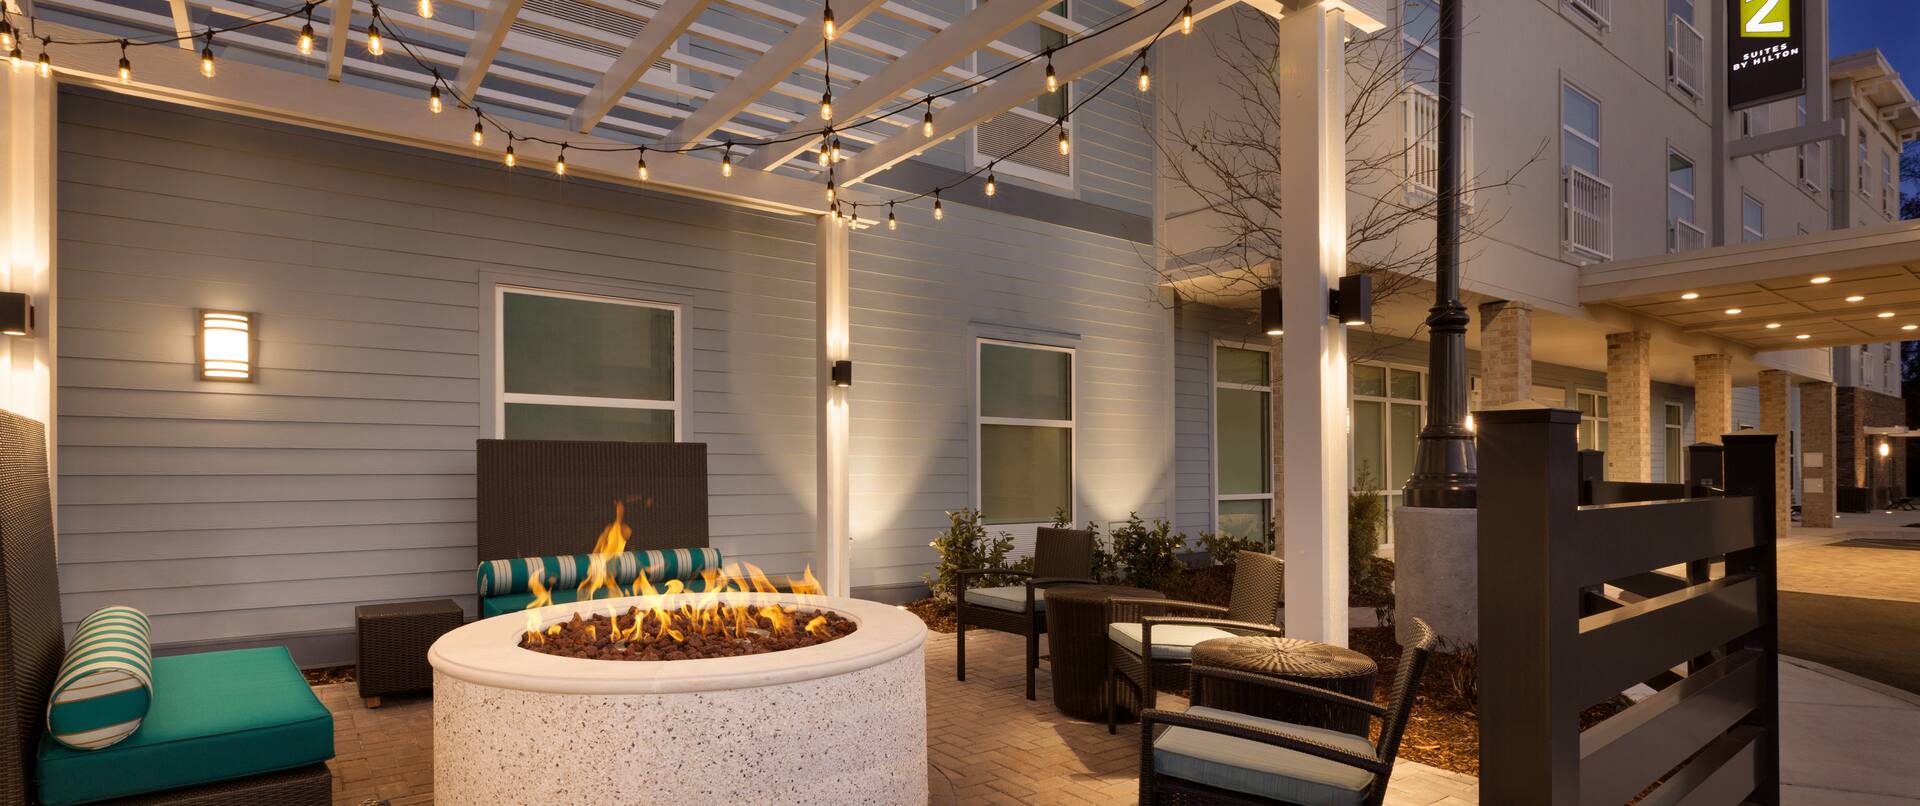 Outdoor Patio at Night with Lounge Chairs and Fire Pit